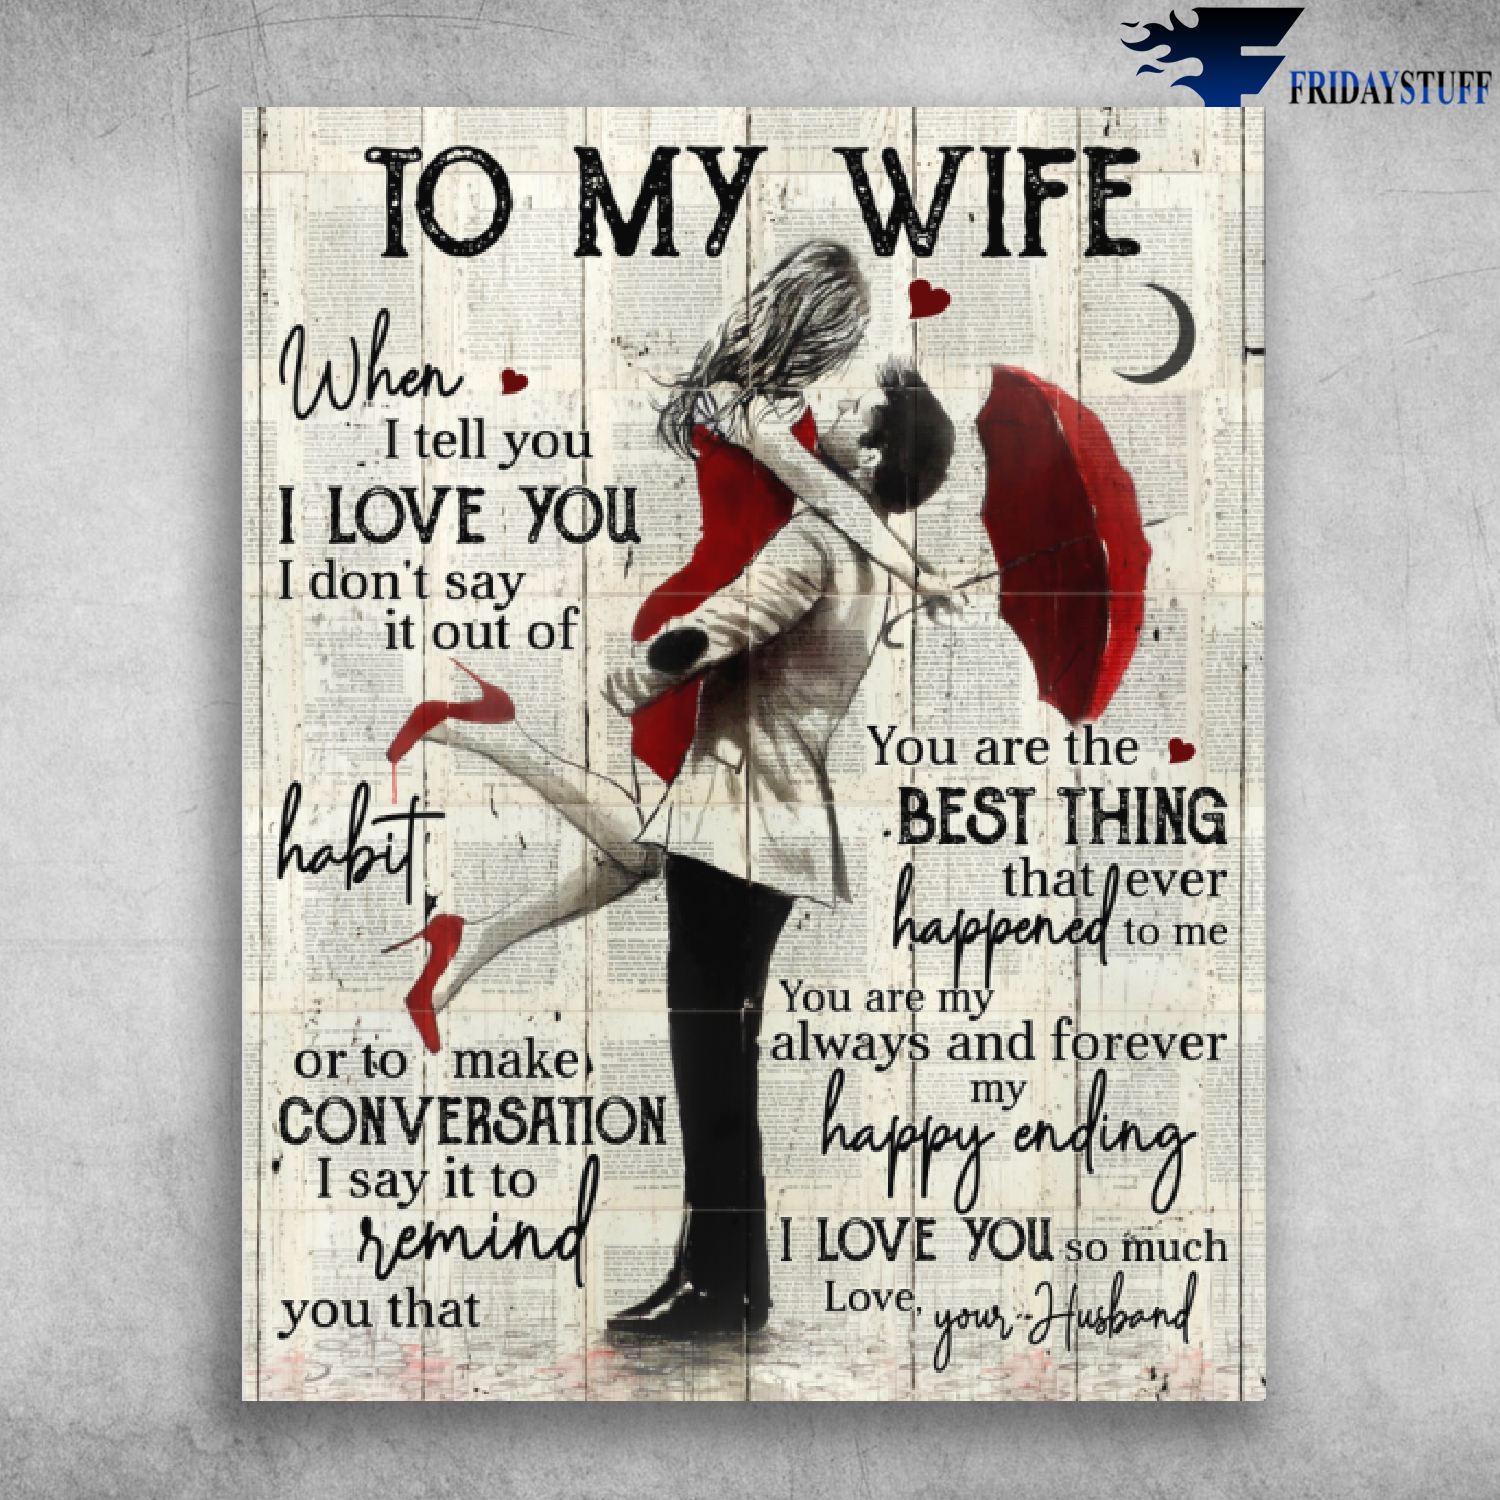 To My Wife When I Tell I Love You I Don't Say In Out Of Habit Or To Make Conversion